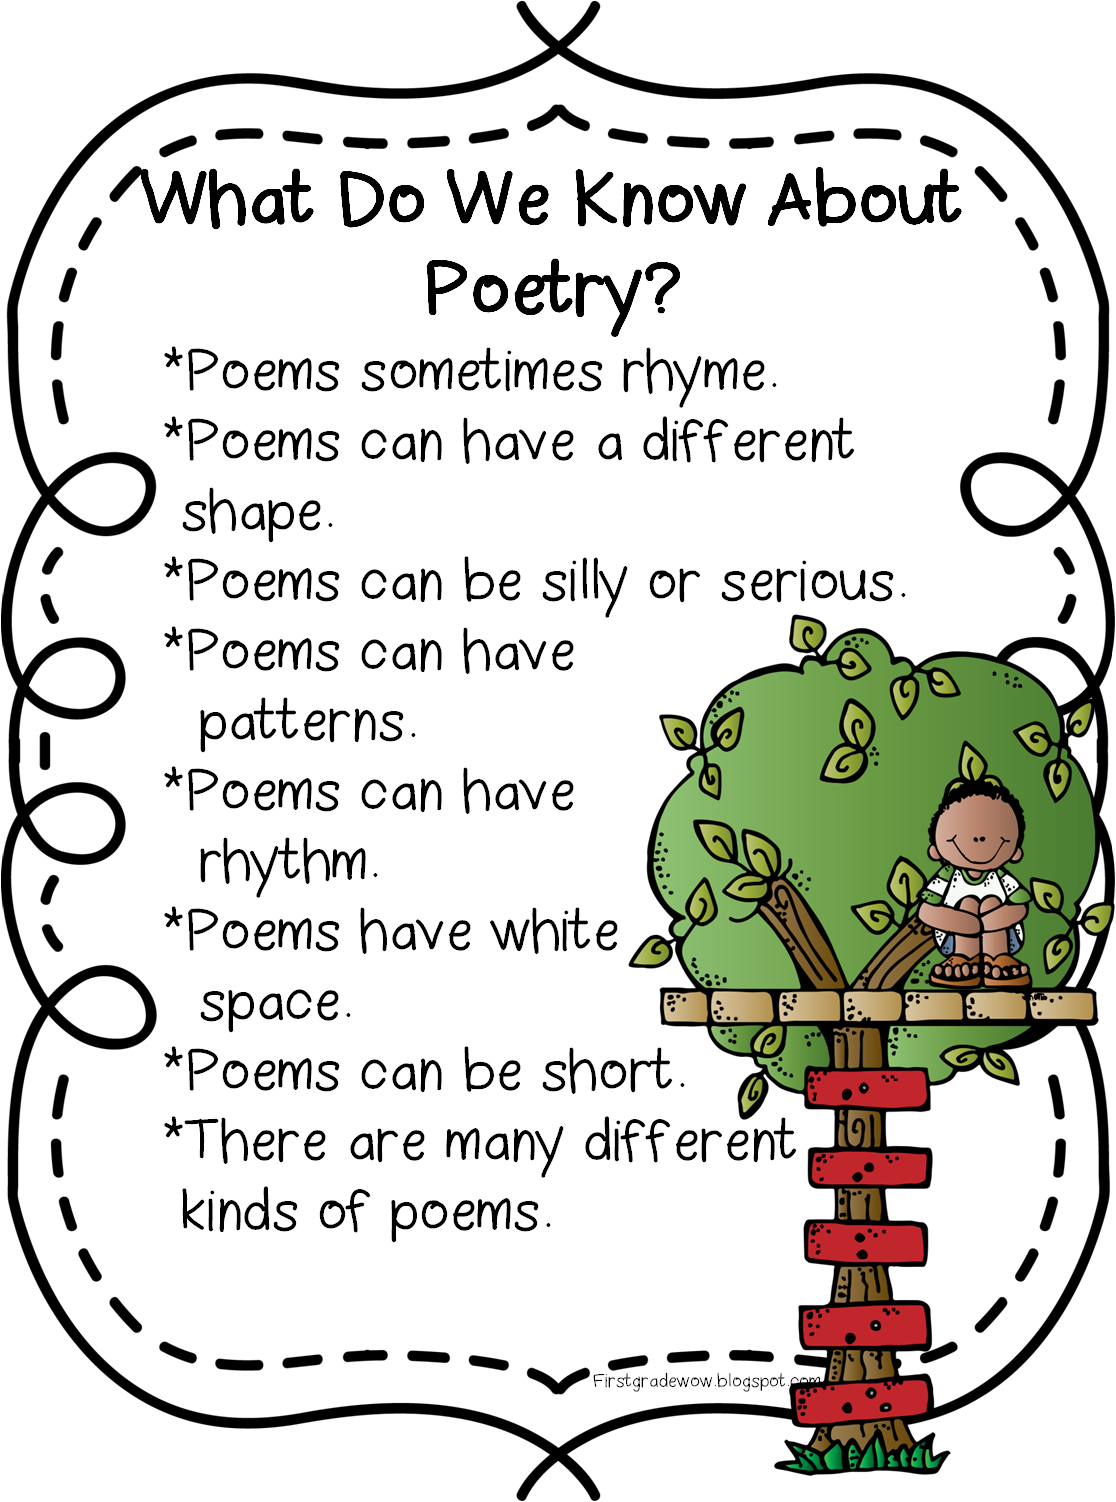 First Grade Wow: Happy Poetry Month!